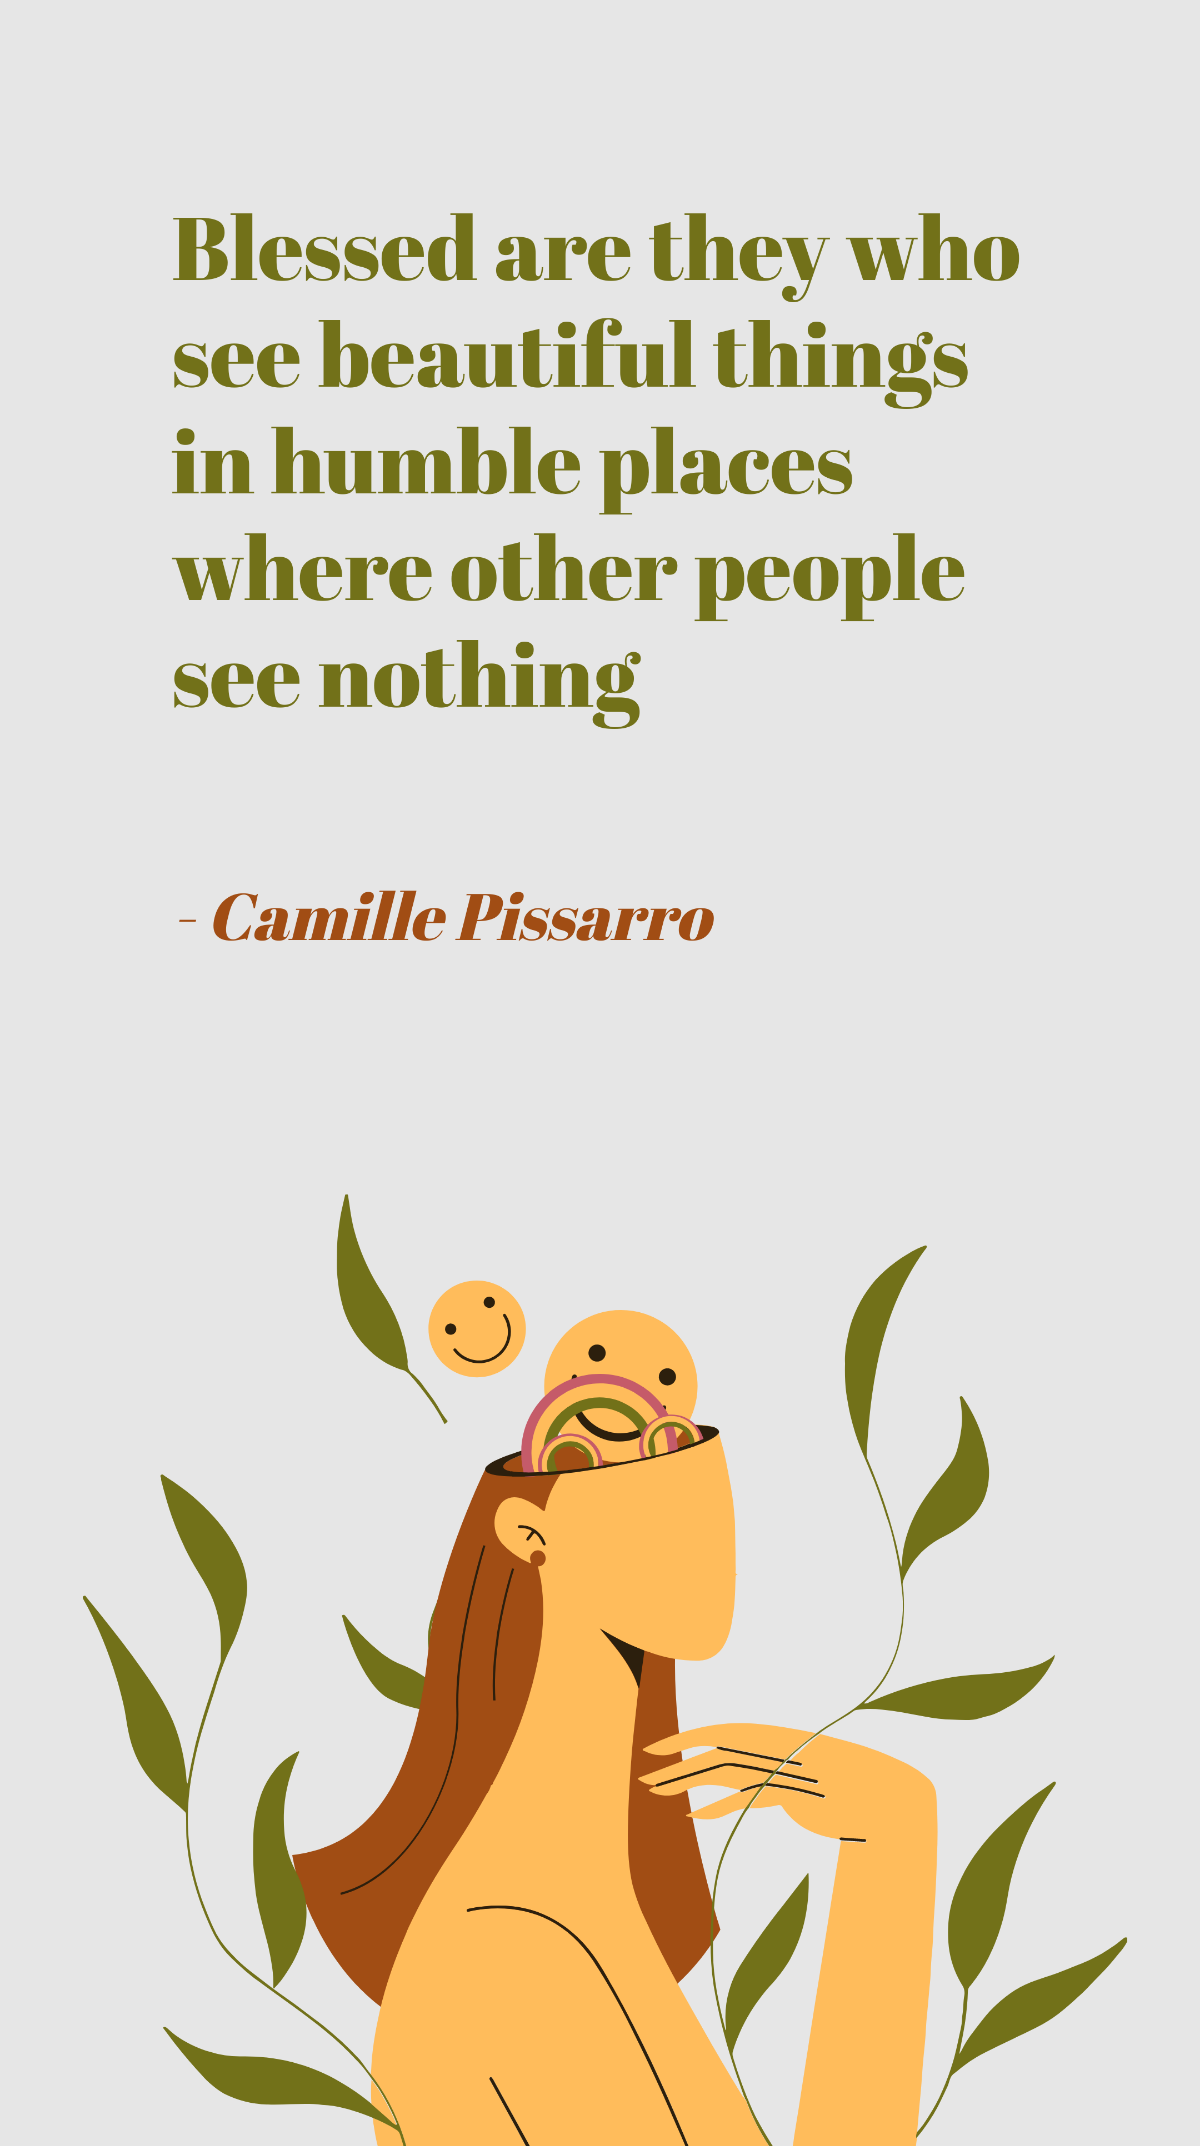 Free Camille Pissarro - Blessed are they who see beautiful things in humble places where other people see nothing Template